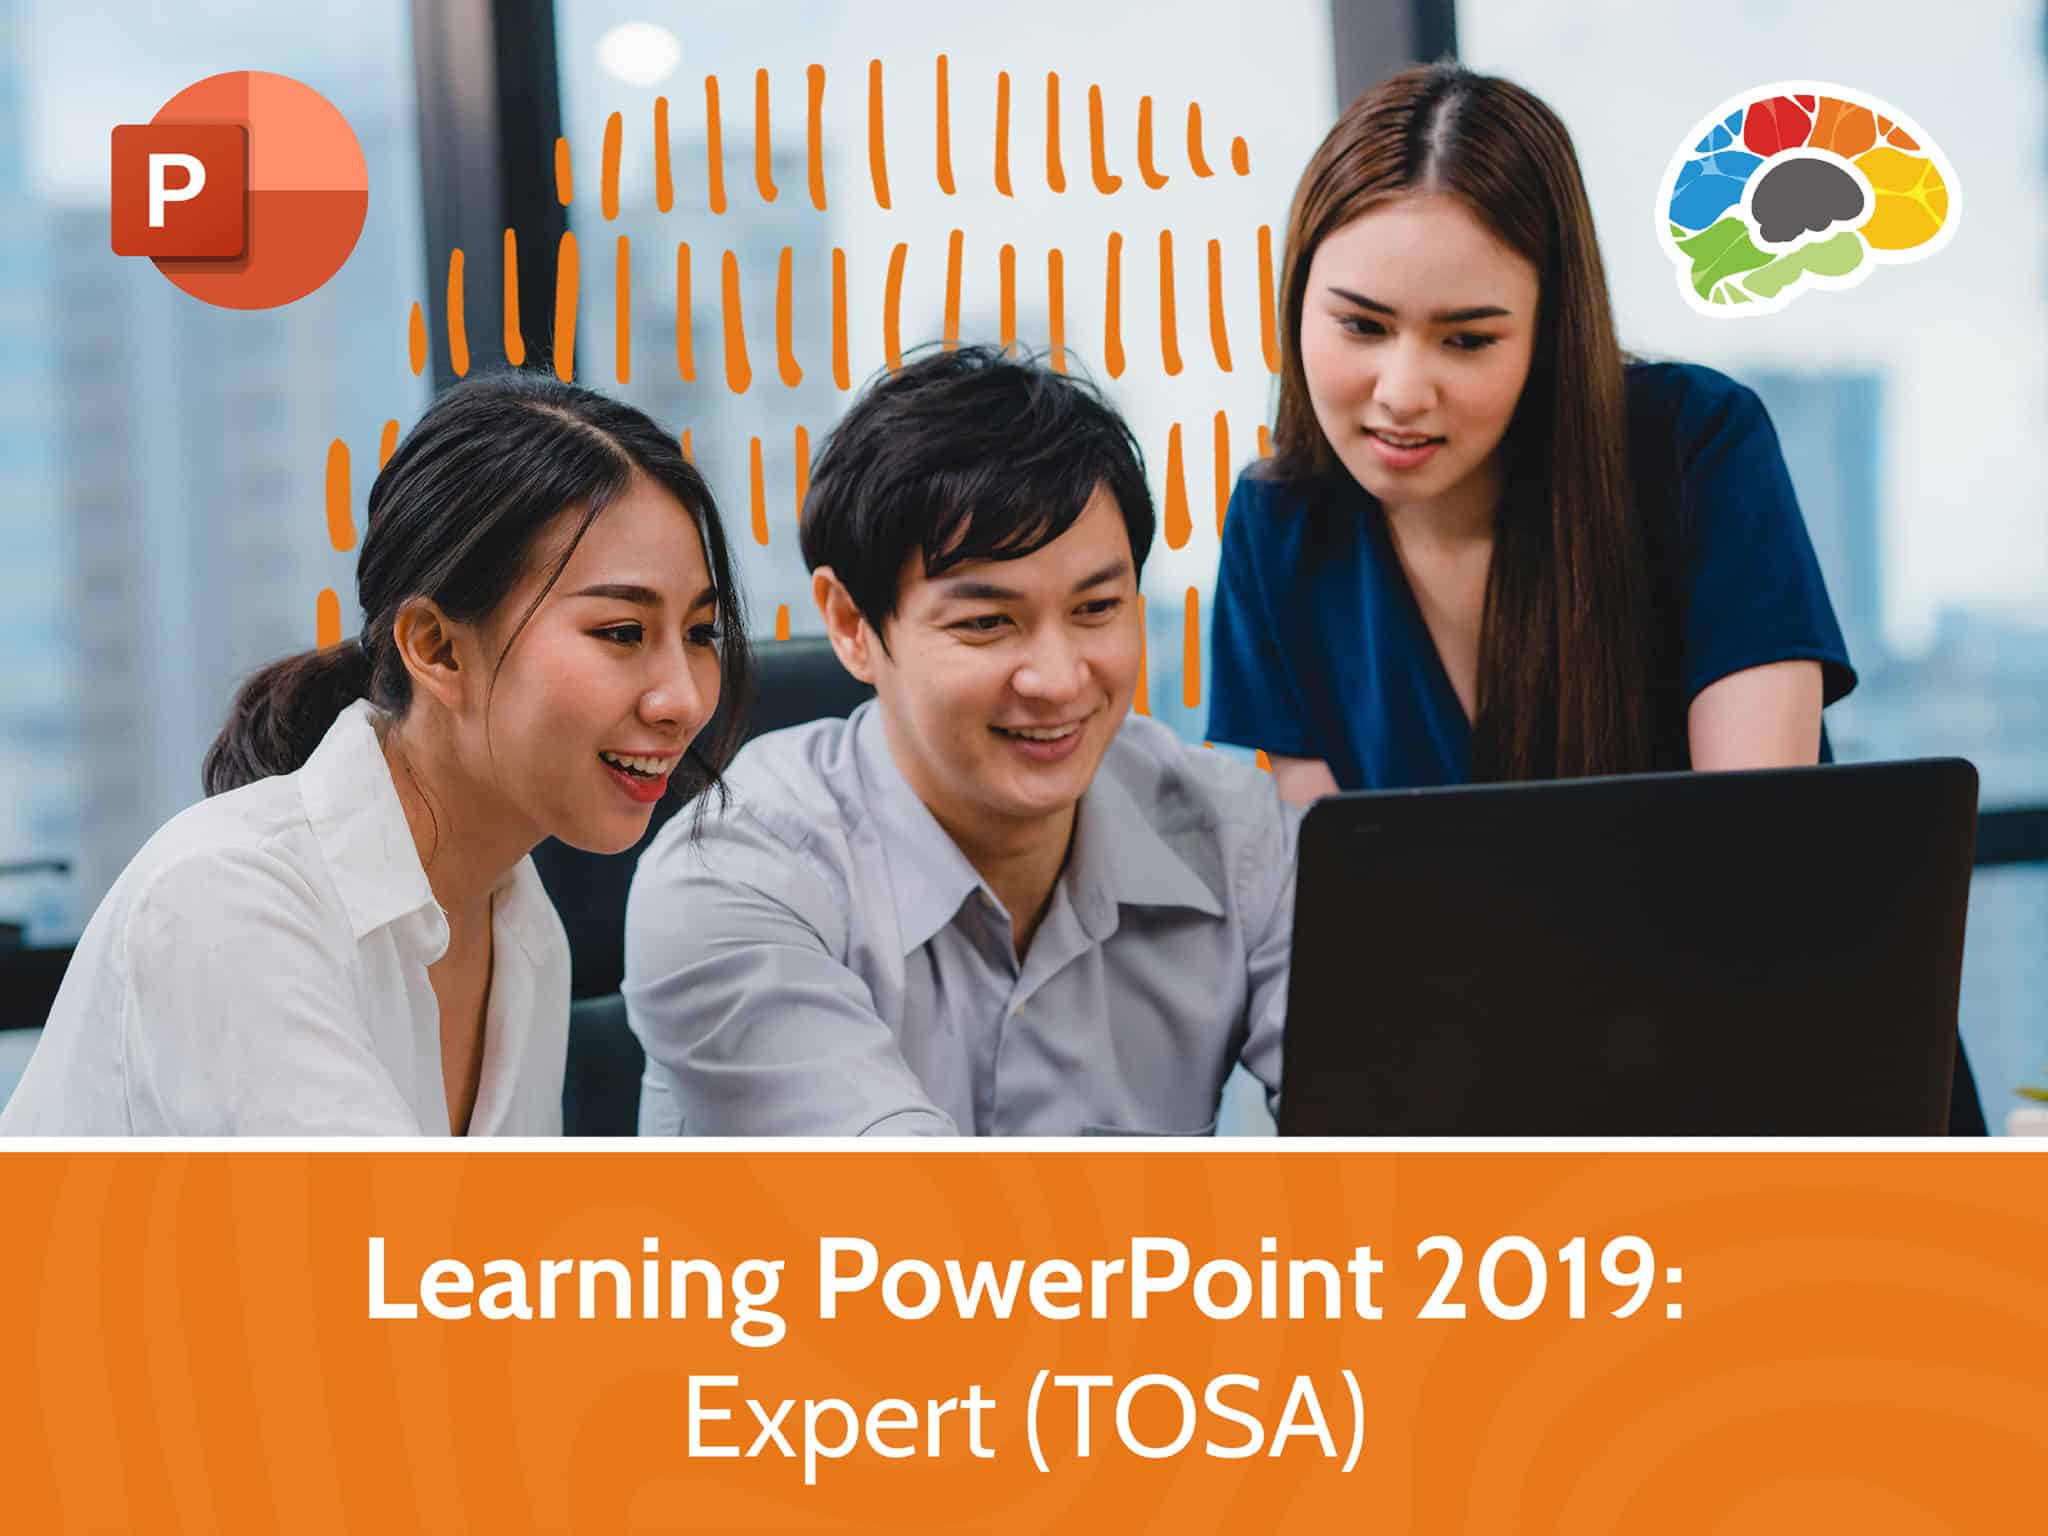 Learning PowerPoint 2019 Expert TOSA scaled